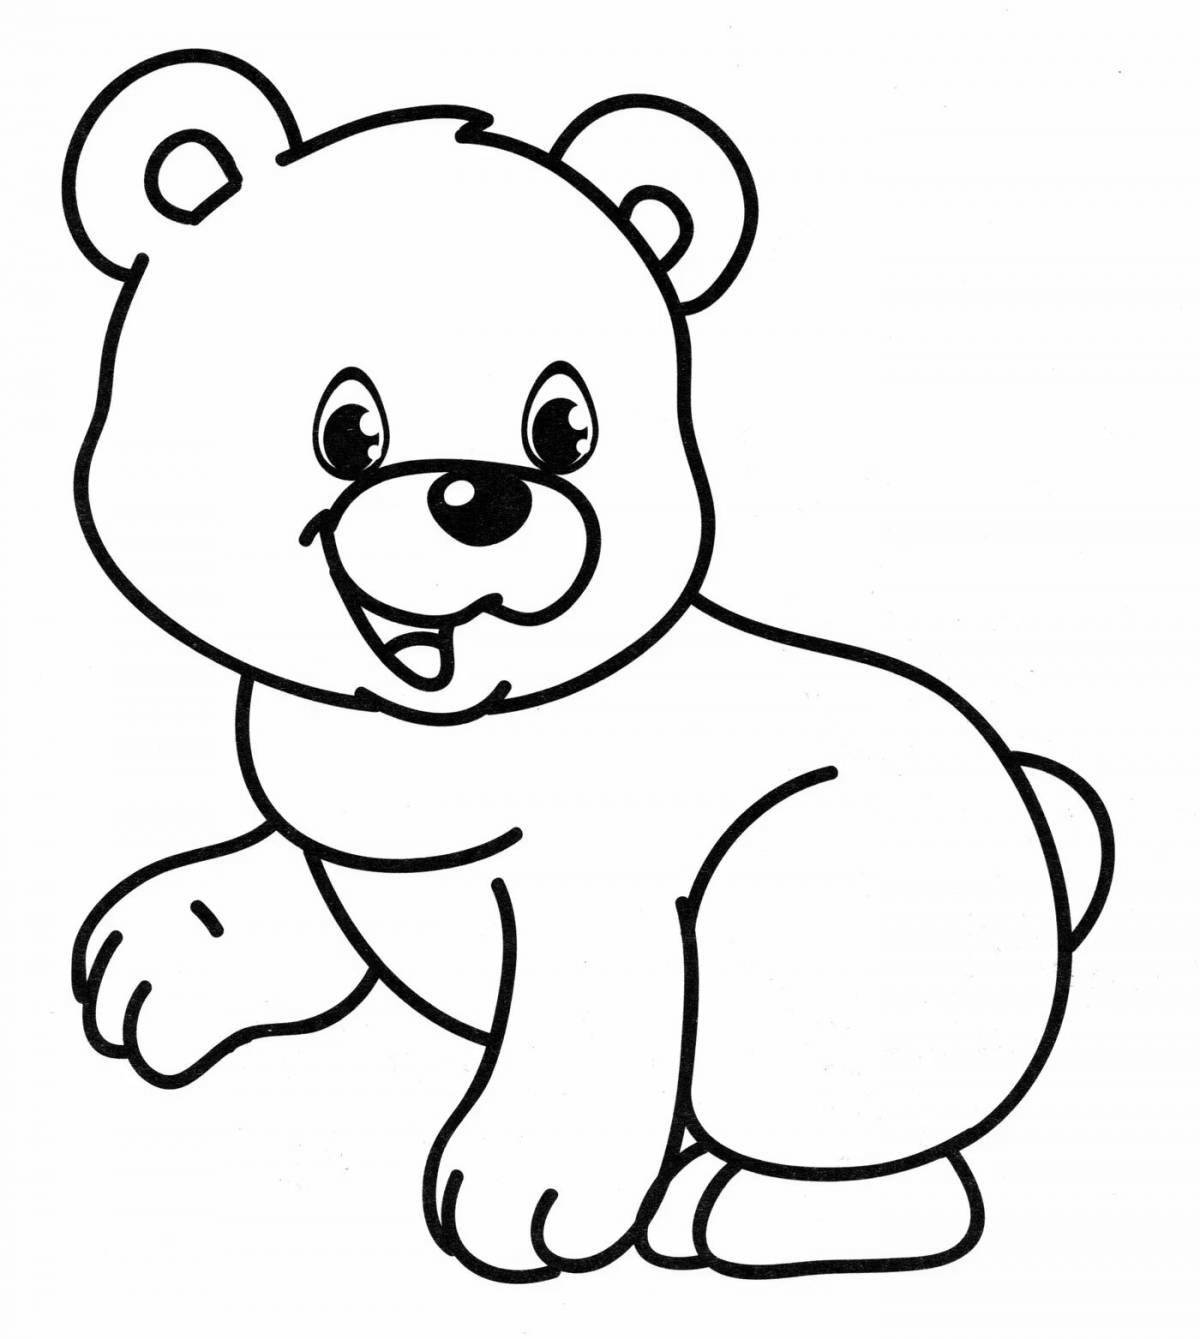 Cute animal coloring pages for 2-3 year olds